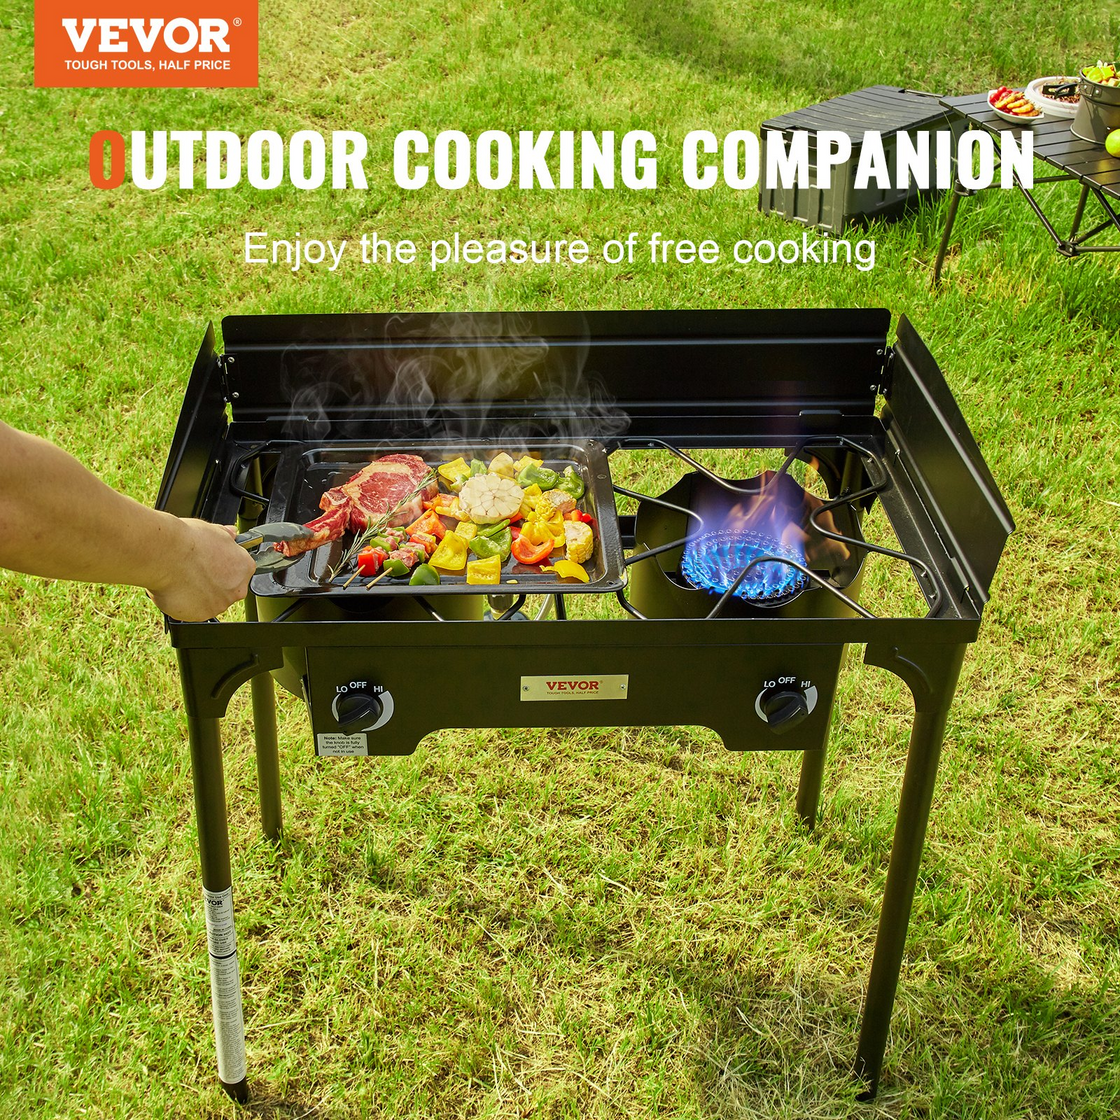 VEVOR Double Burner Outdoor Camping Stove, 60,000-BTU Cooking Stove